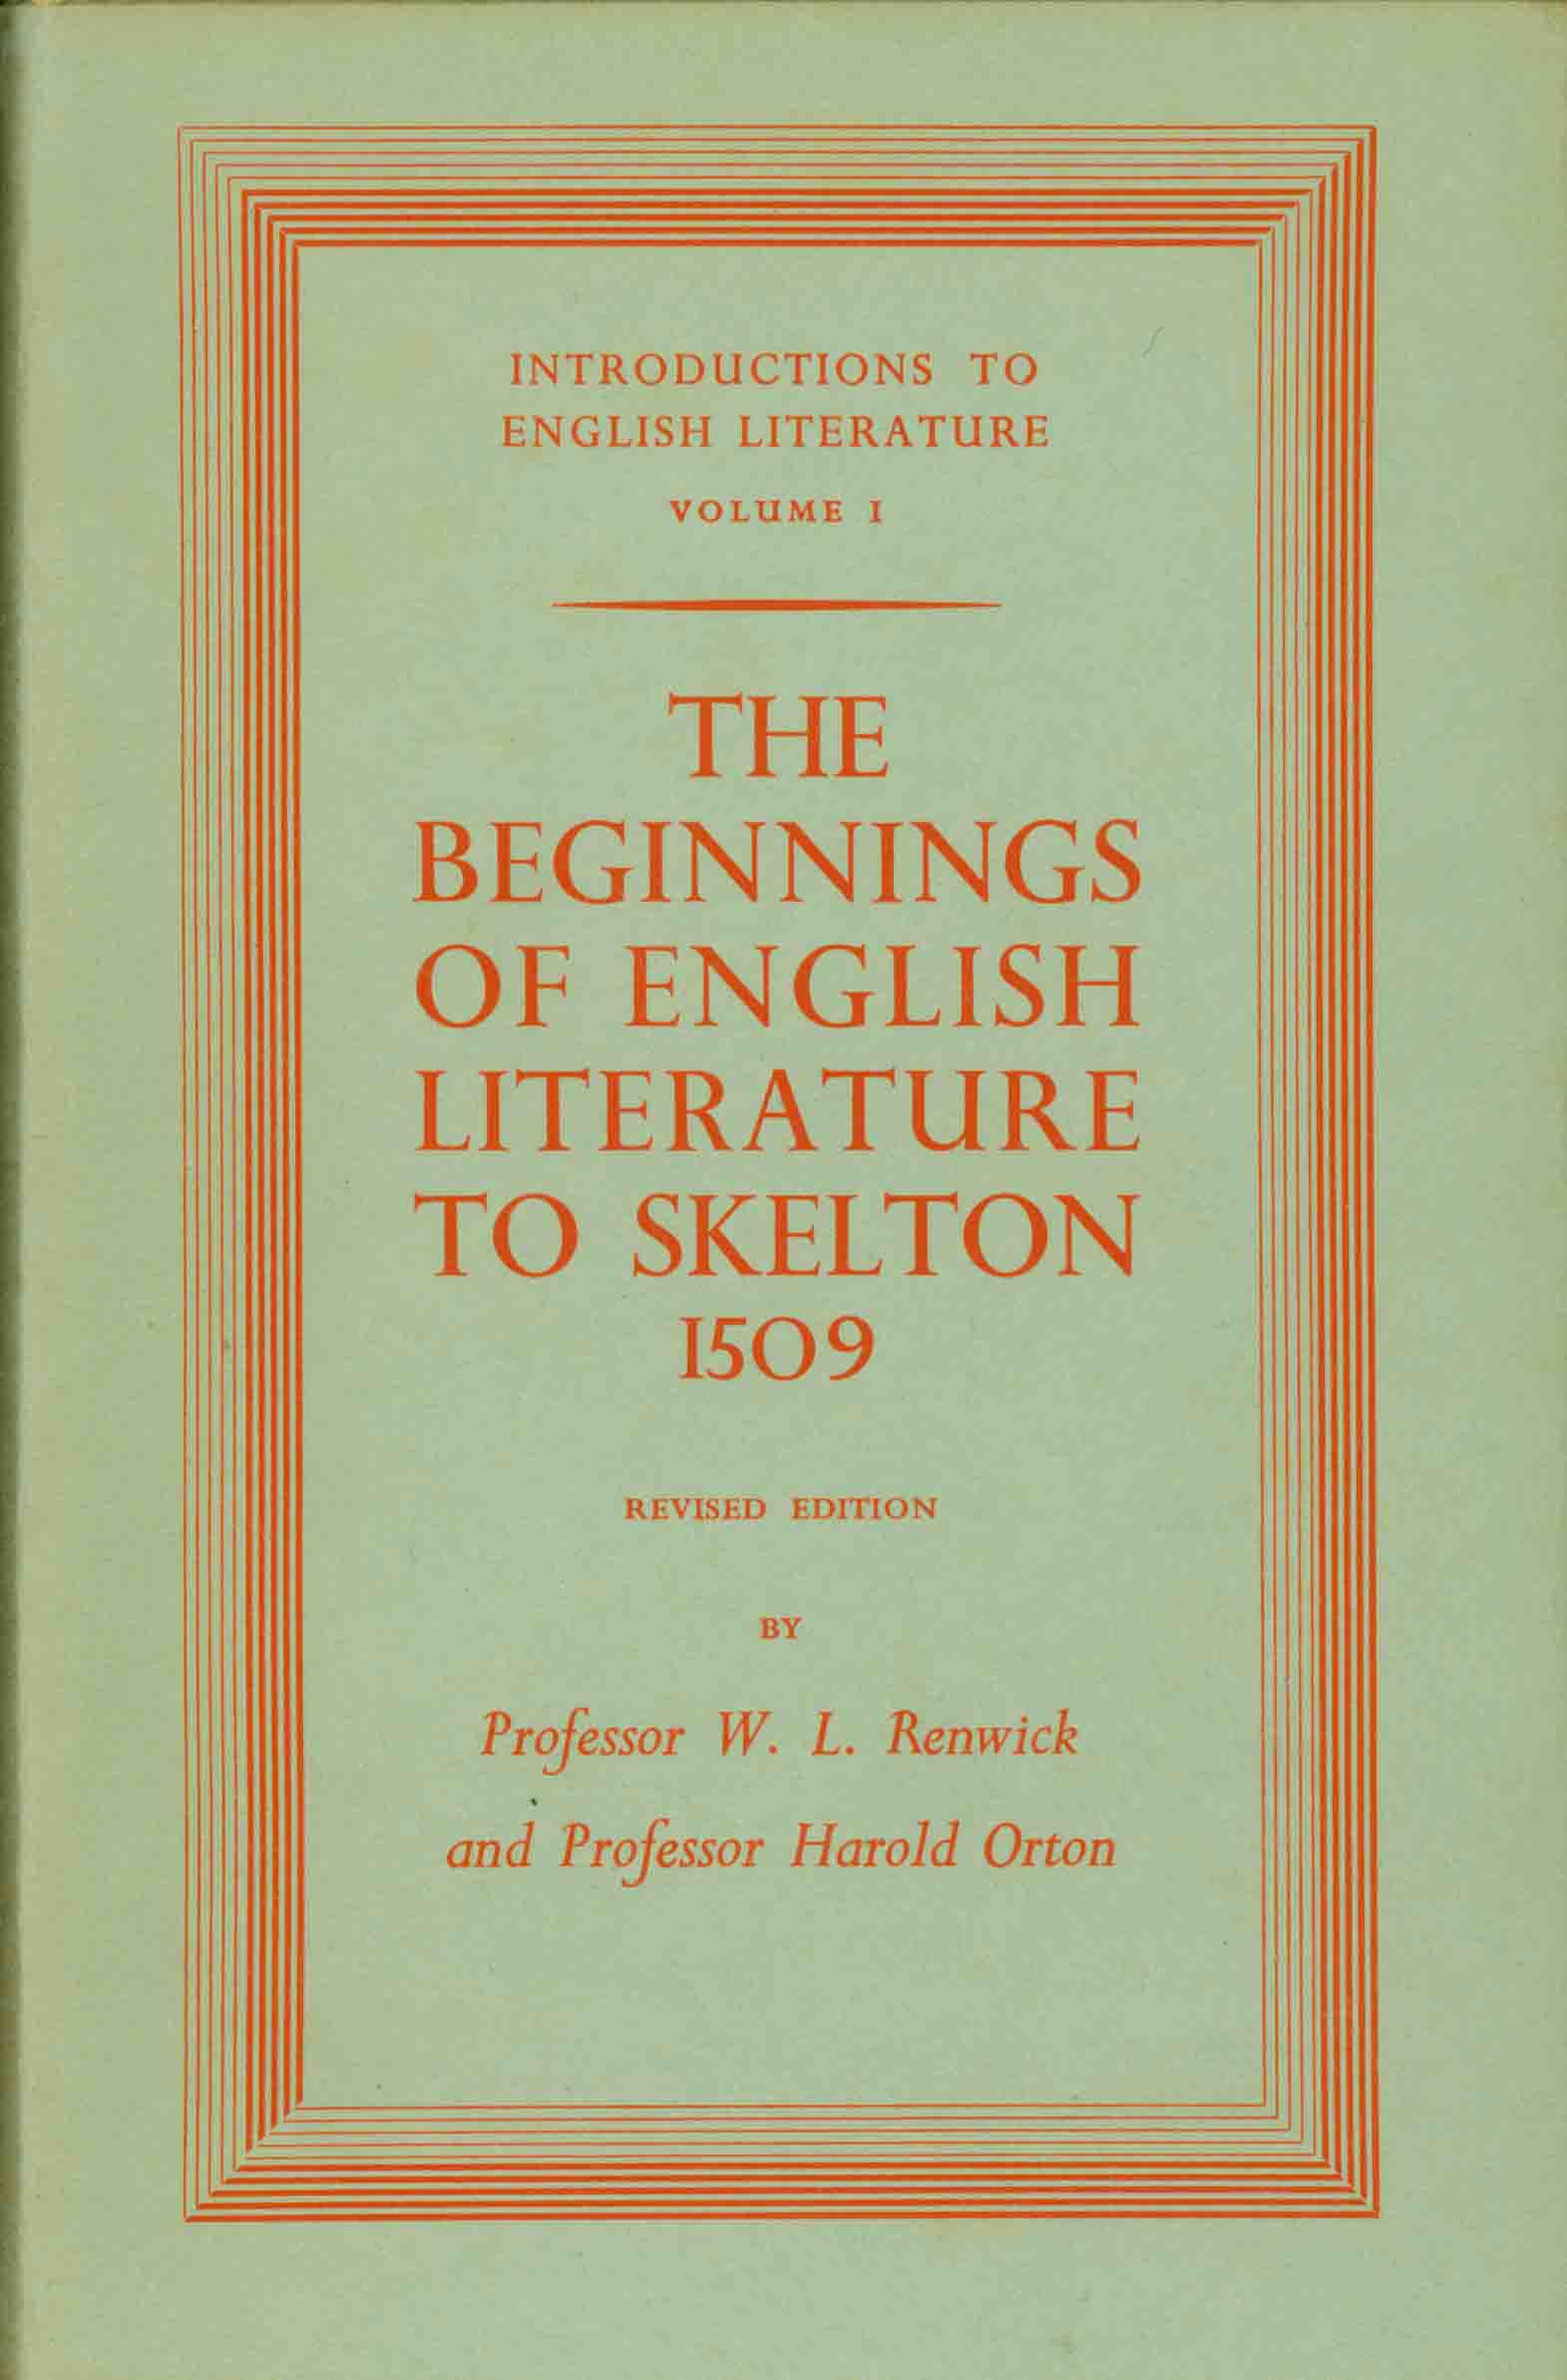 introductions-to-english-literature